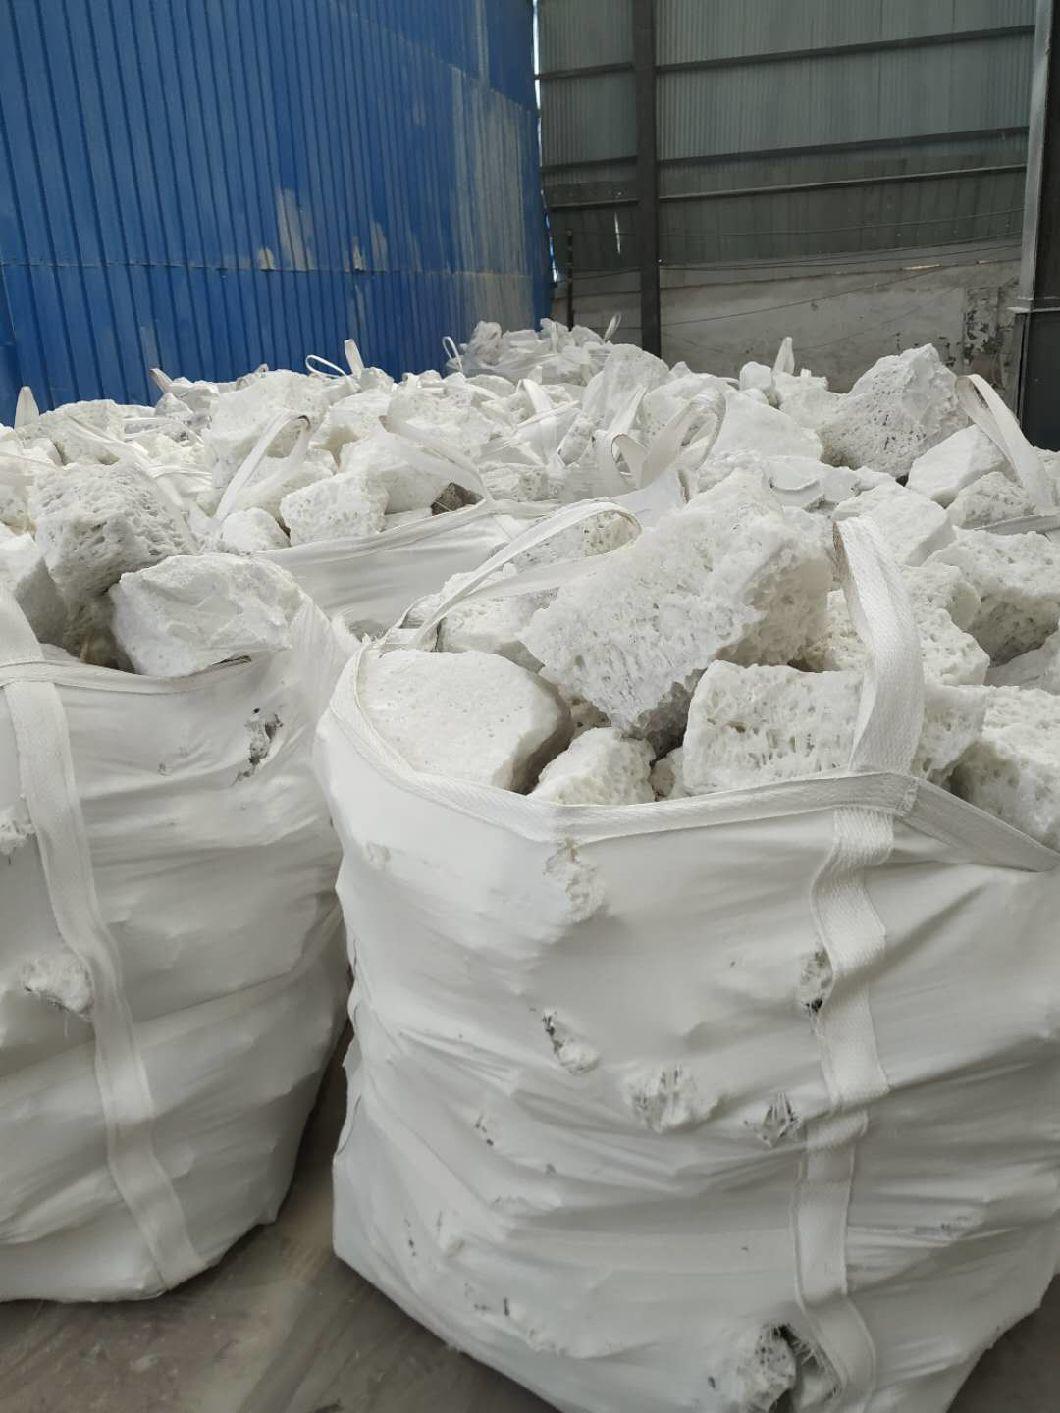 99.5% Purity Refractory White Aluminum Oxide 5-3mm